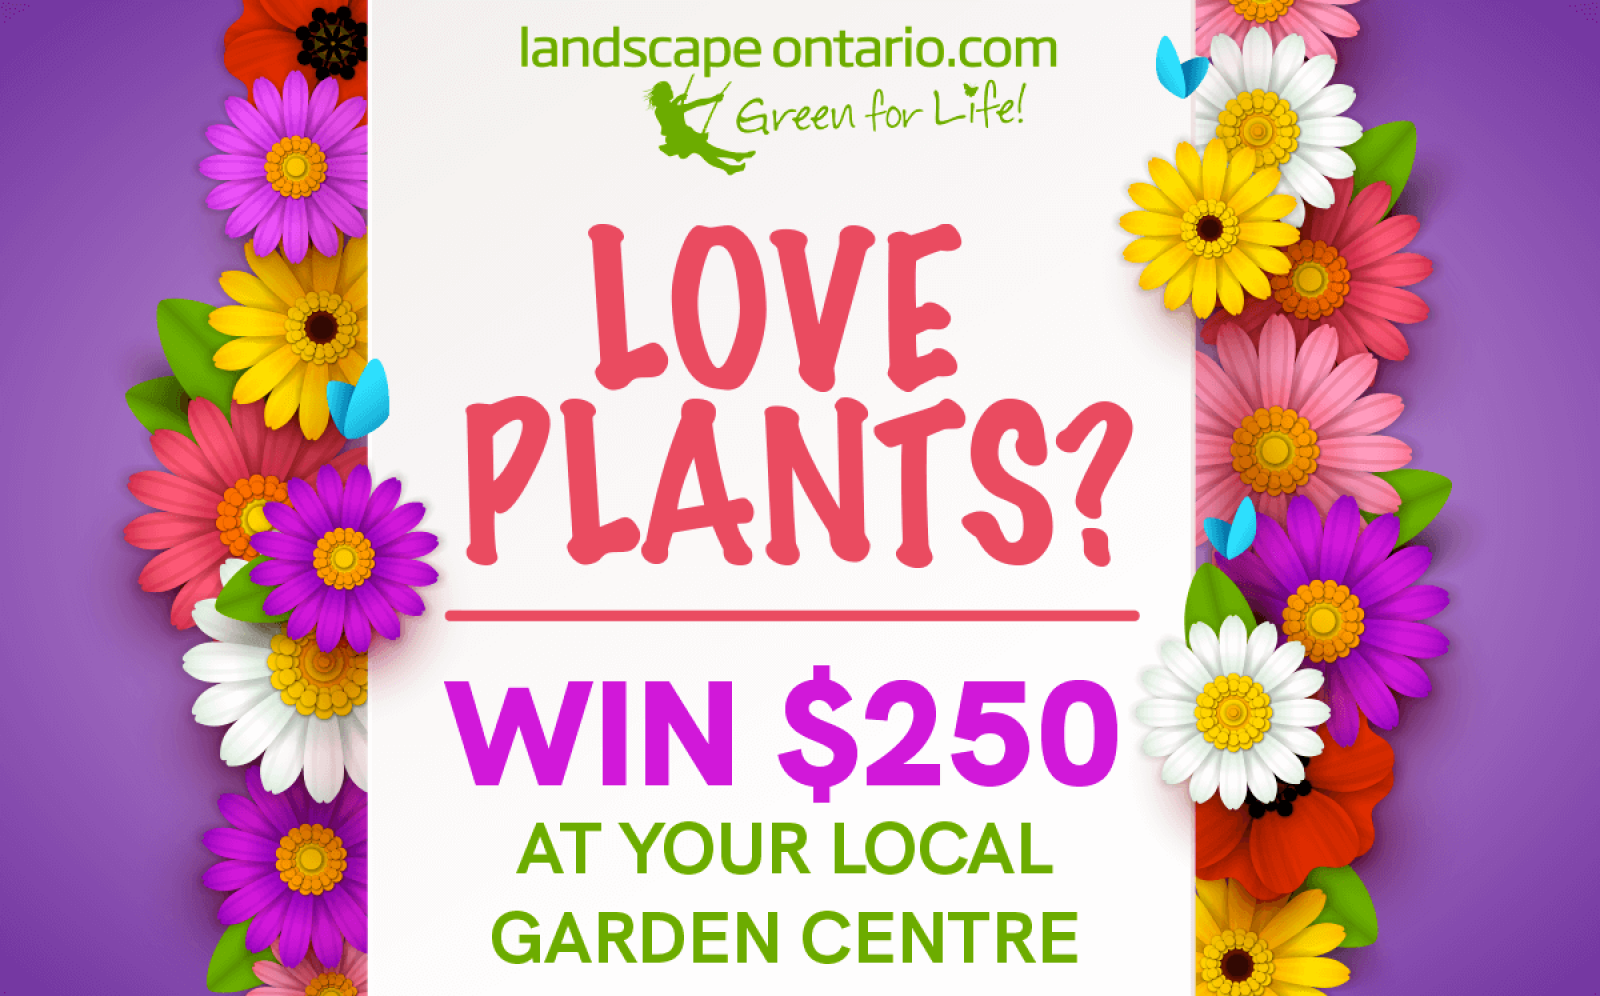 Love plants? We want to hear from you!